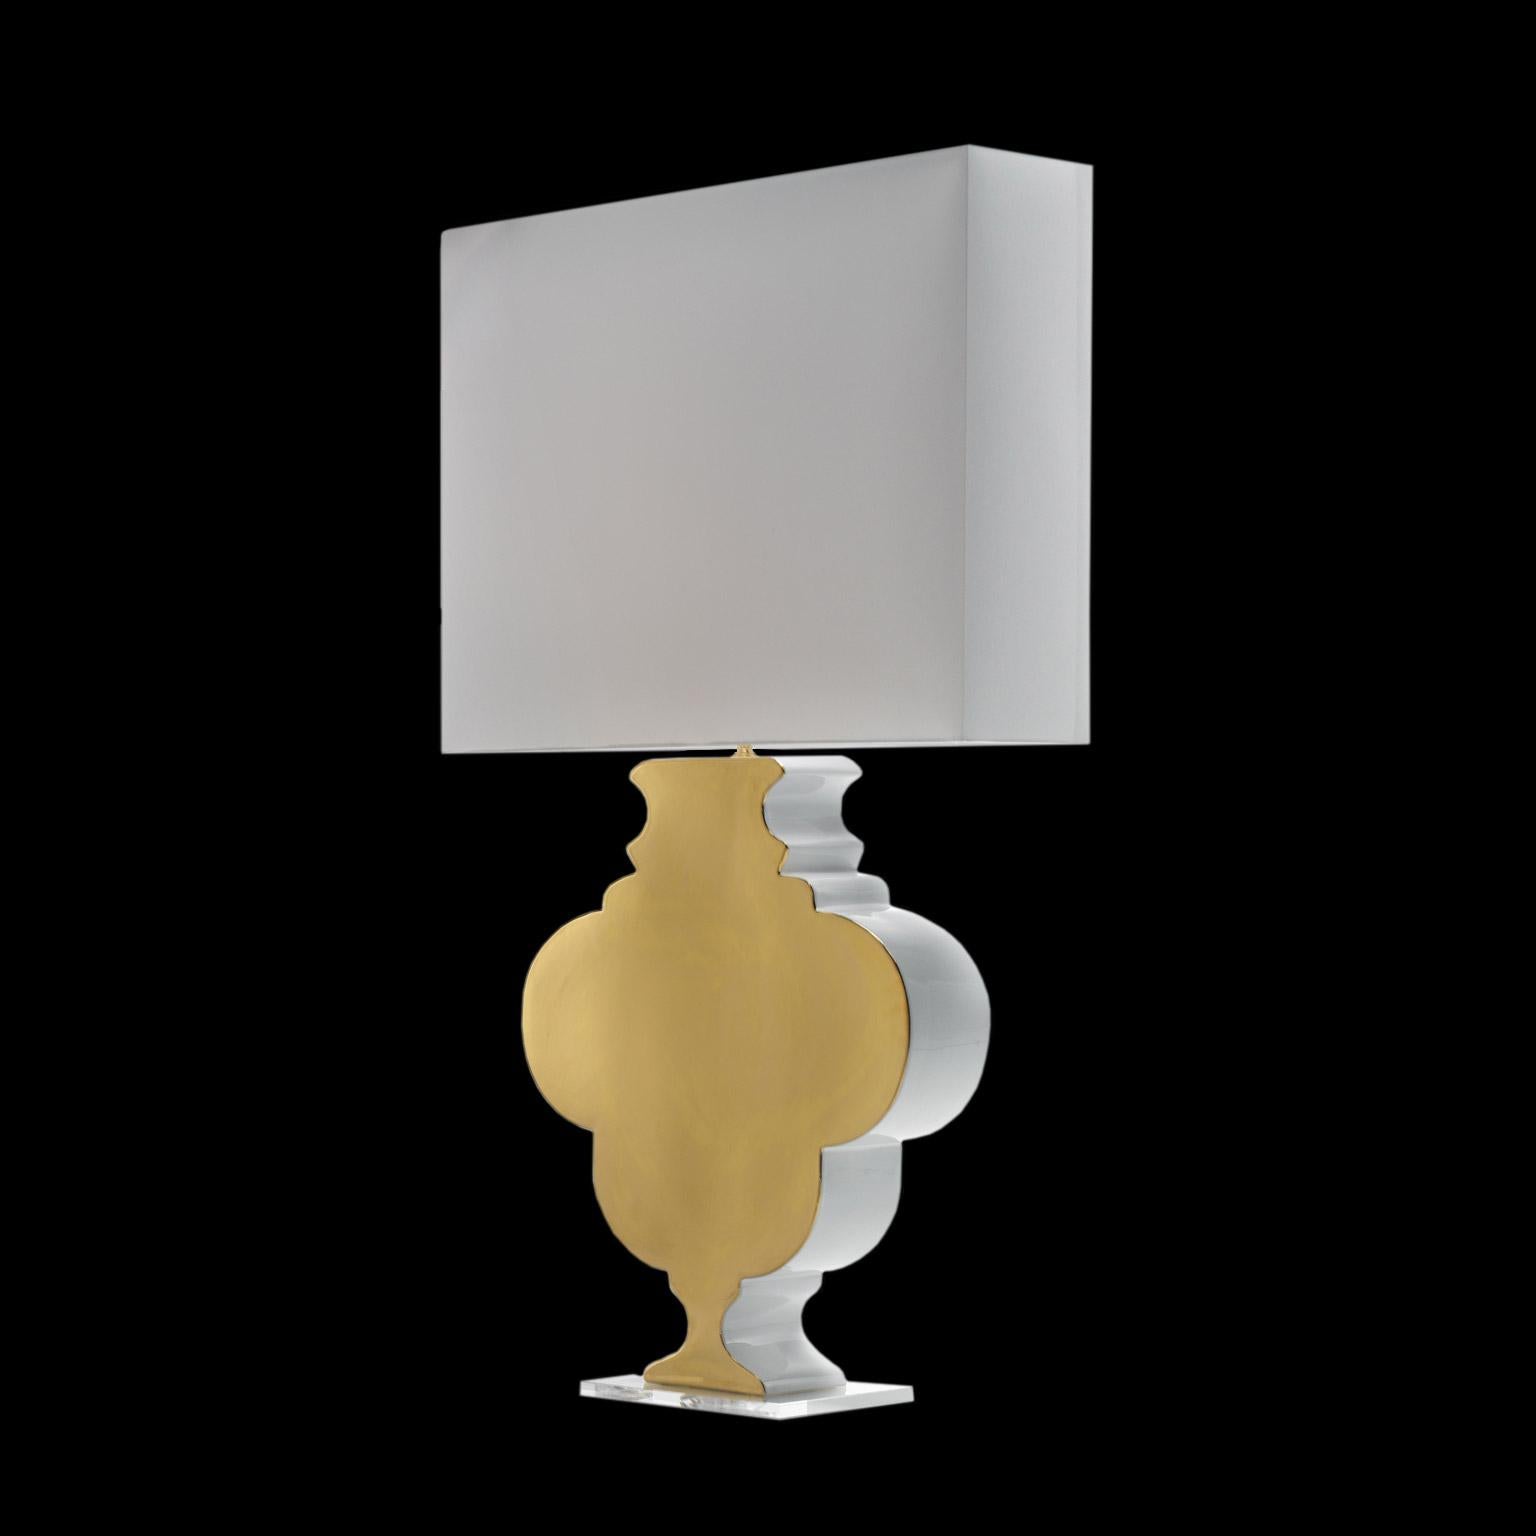 Ceramic lamp GRACE 50
cod. SA001
handcrafted in 24-karat gold 
and white enamel sides
with cotton lampshade

measures: 
H. 127.0 cm. x 80.0 cm. x 20.0 cm.